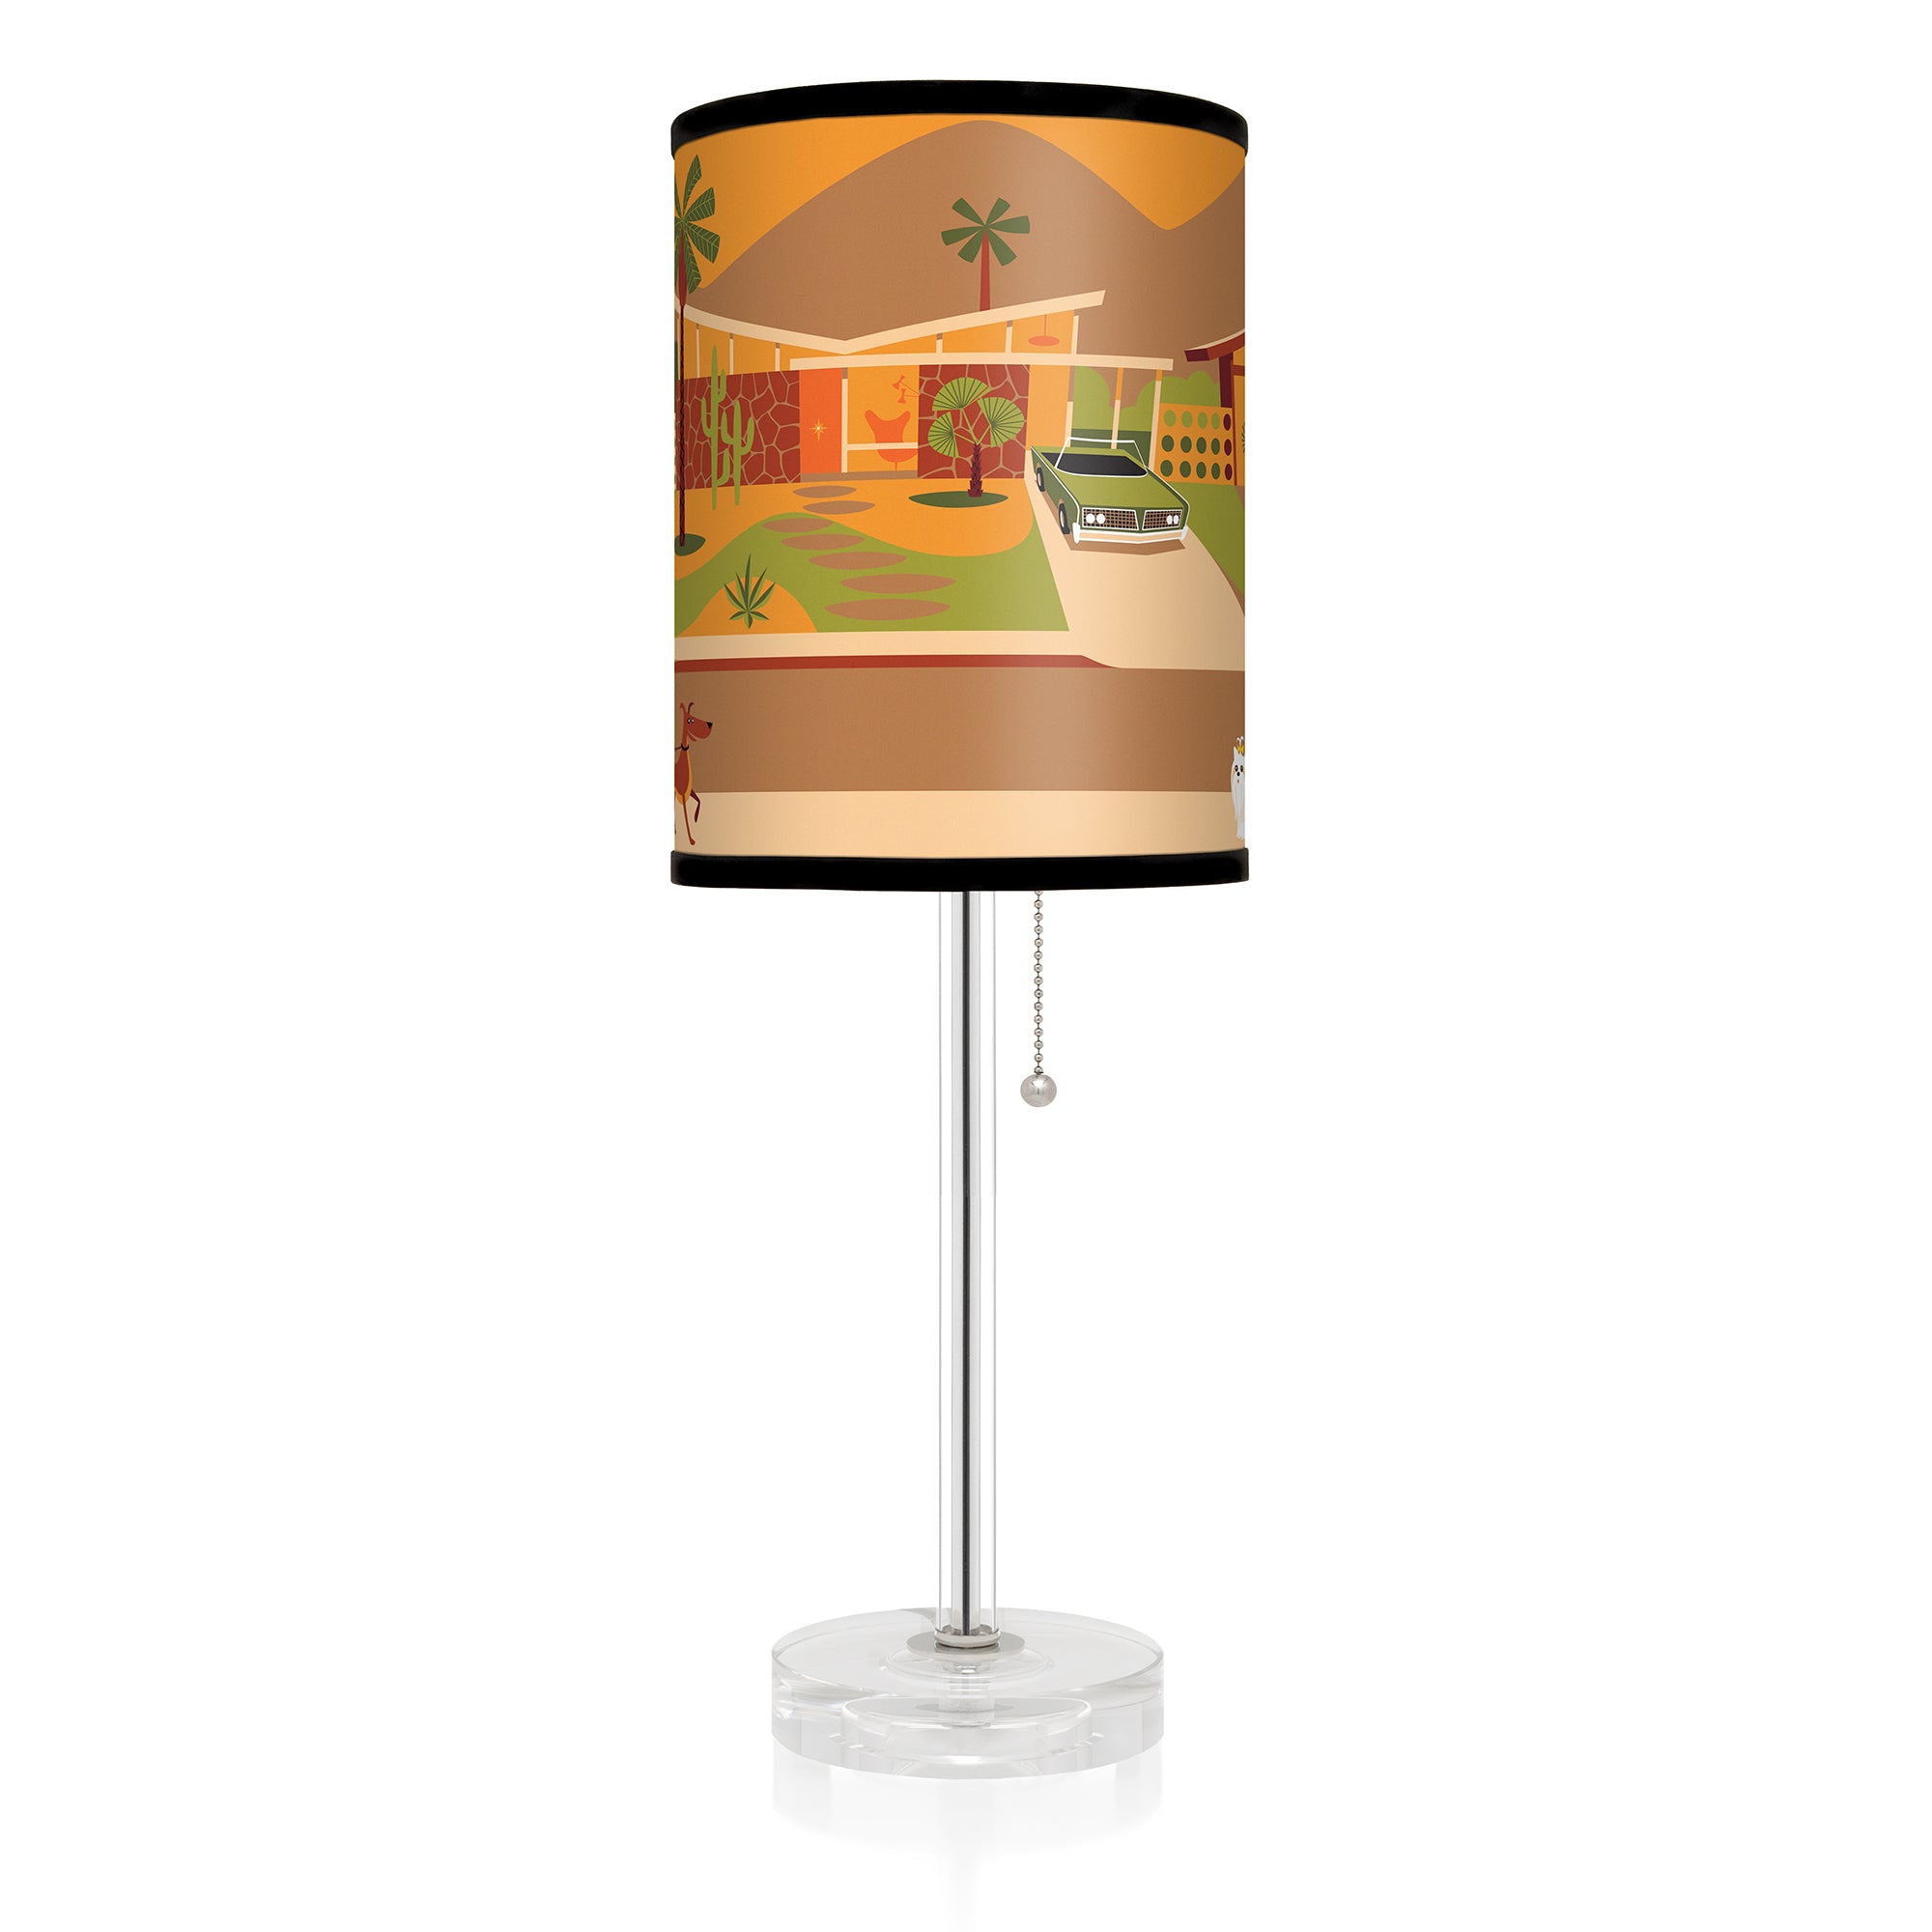 The Neighborhood Daddy Issues Lamp Classic Celebrity Lamp with Plastic Base